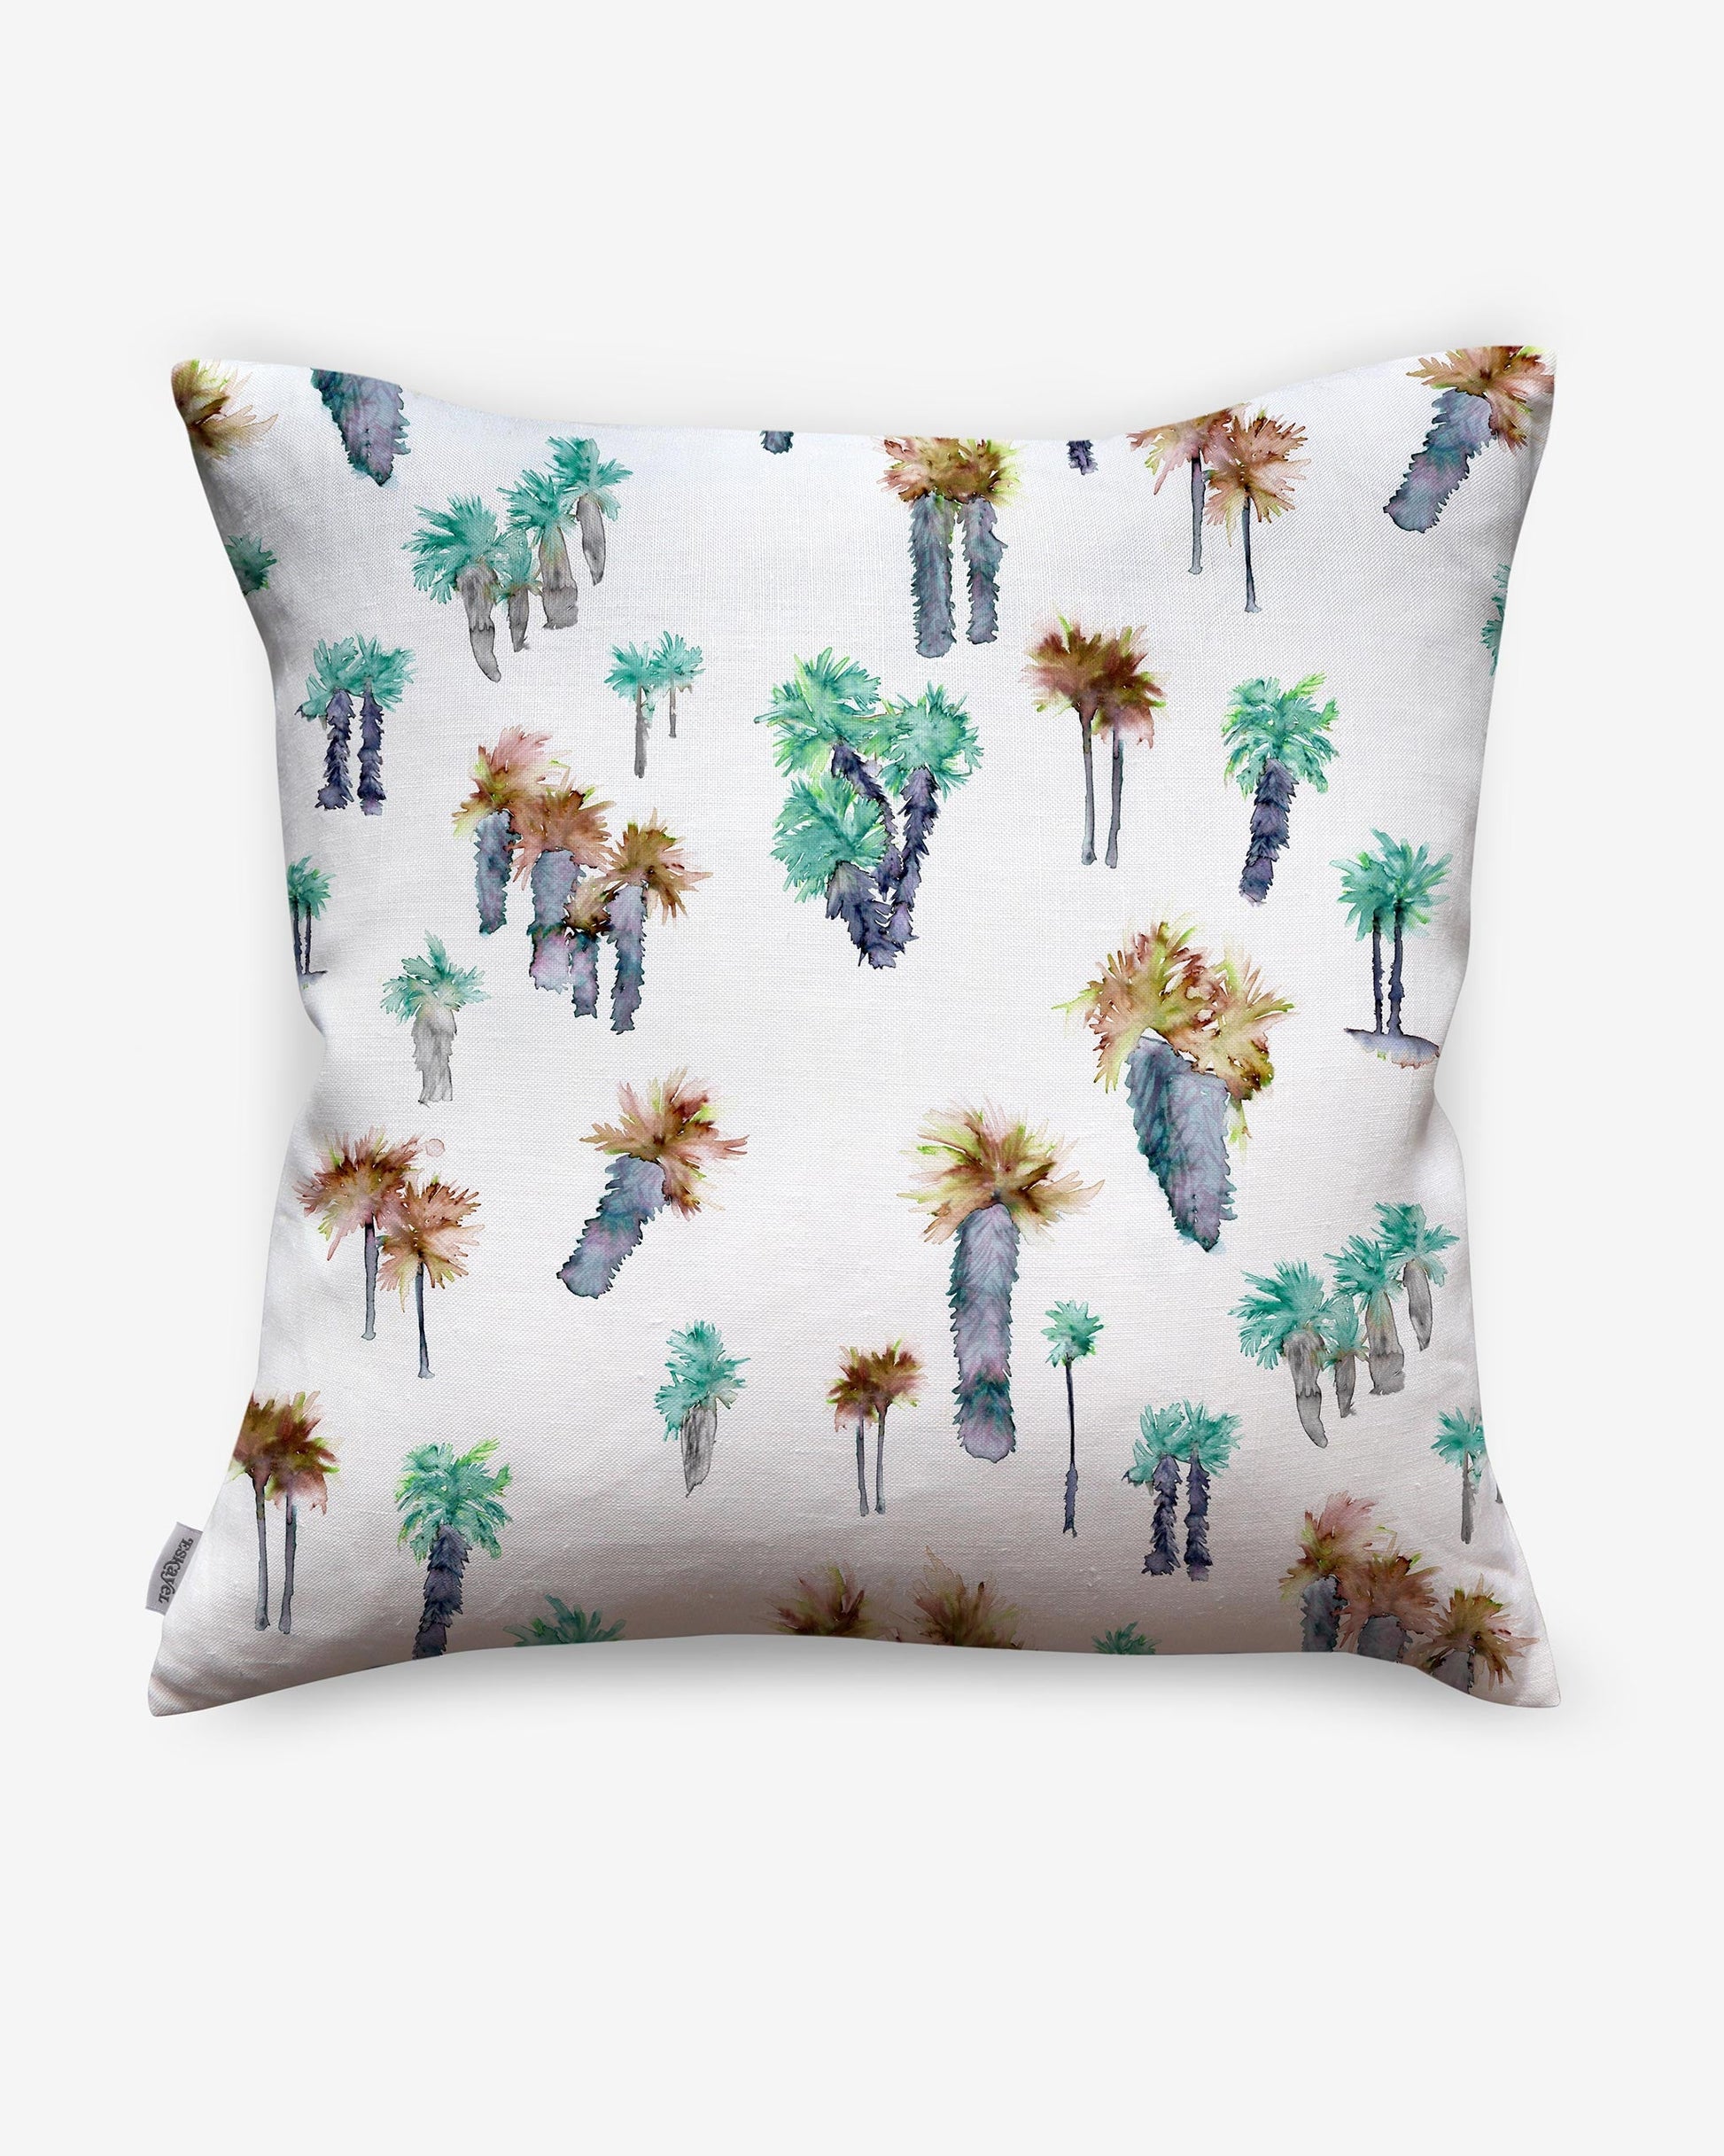 A Perfect Palm Pillow Pool with watercolor palm trees on it